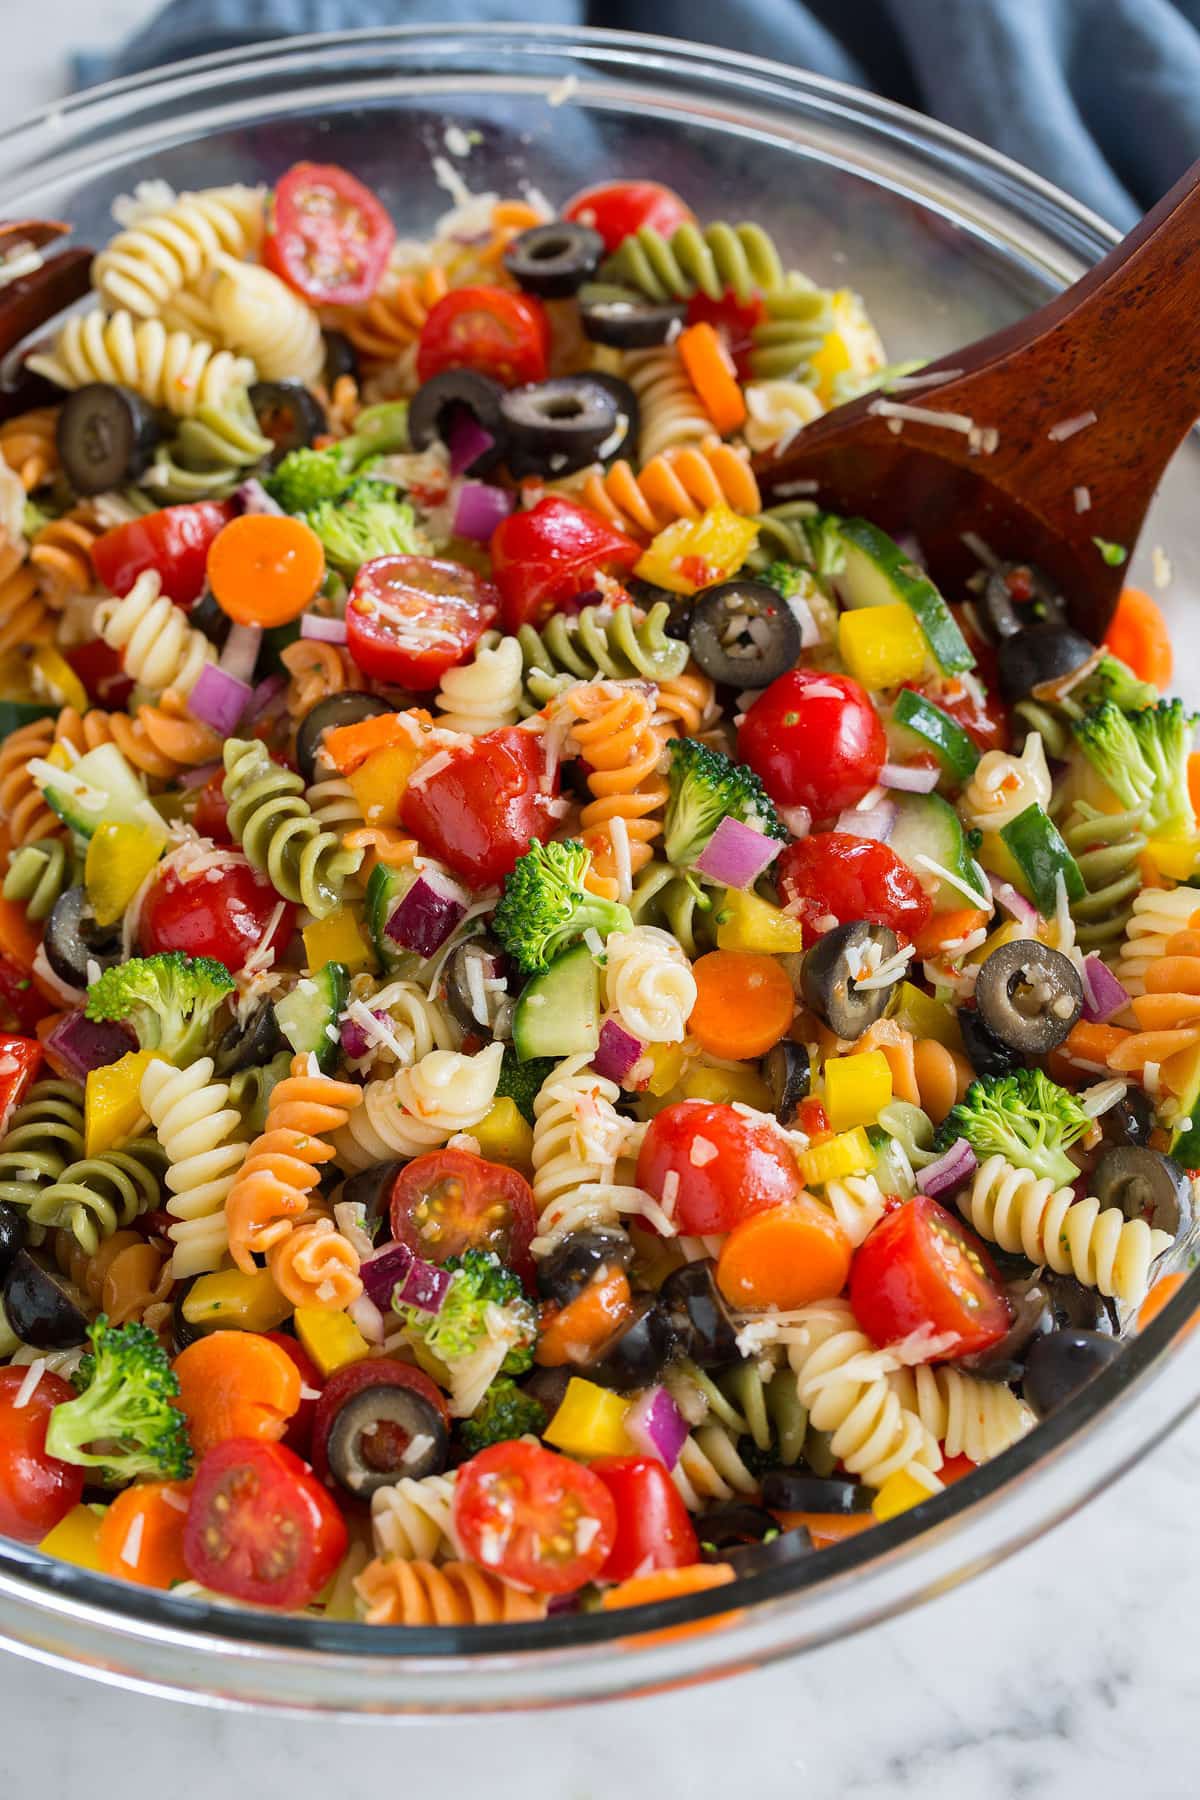 Easy Pasta Salad Recipe (The Best!) | Marietjie | Copy Me That